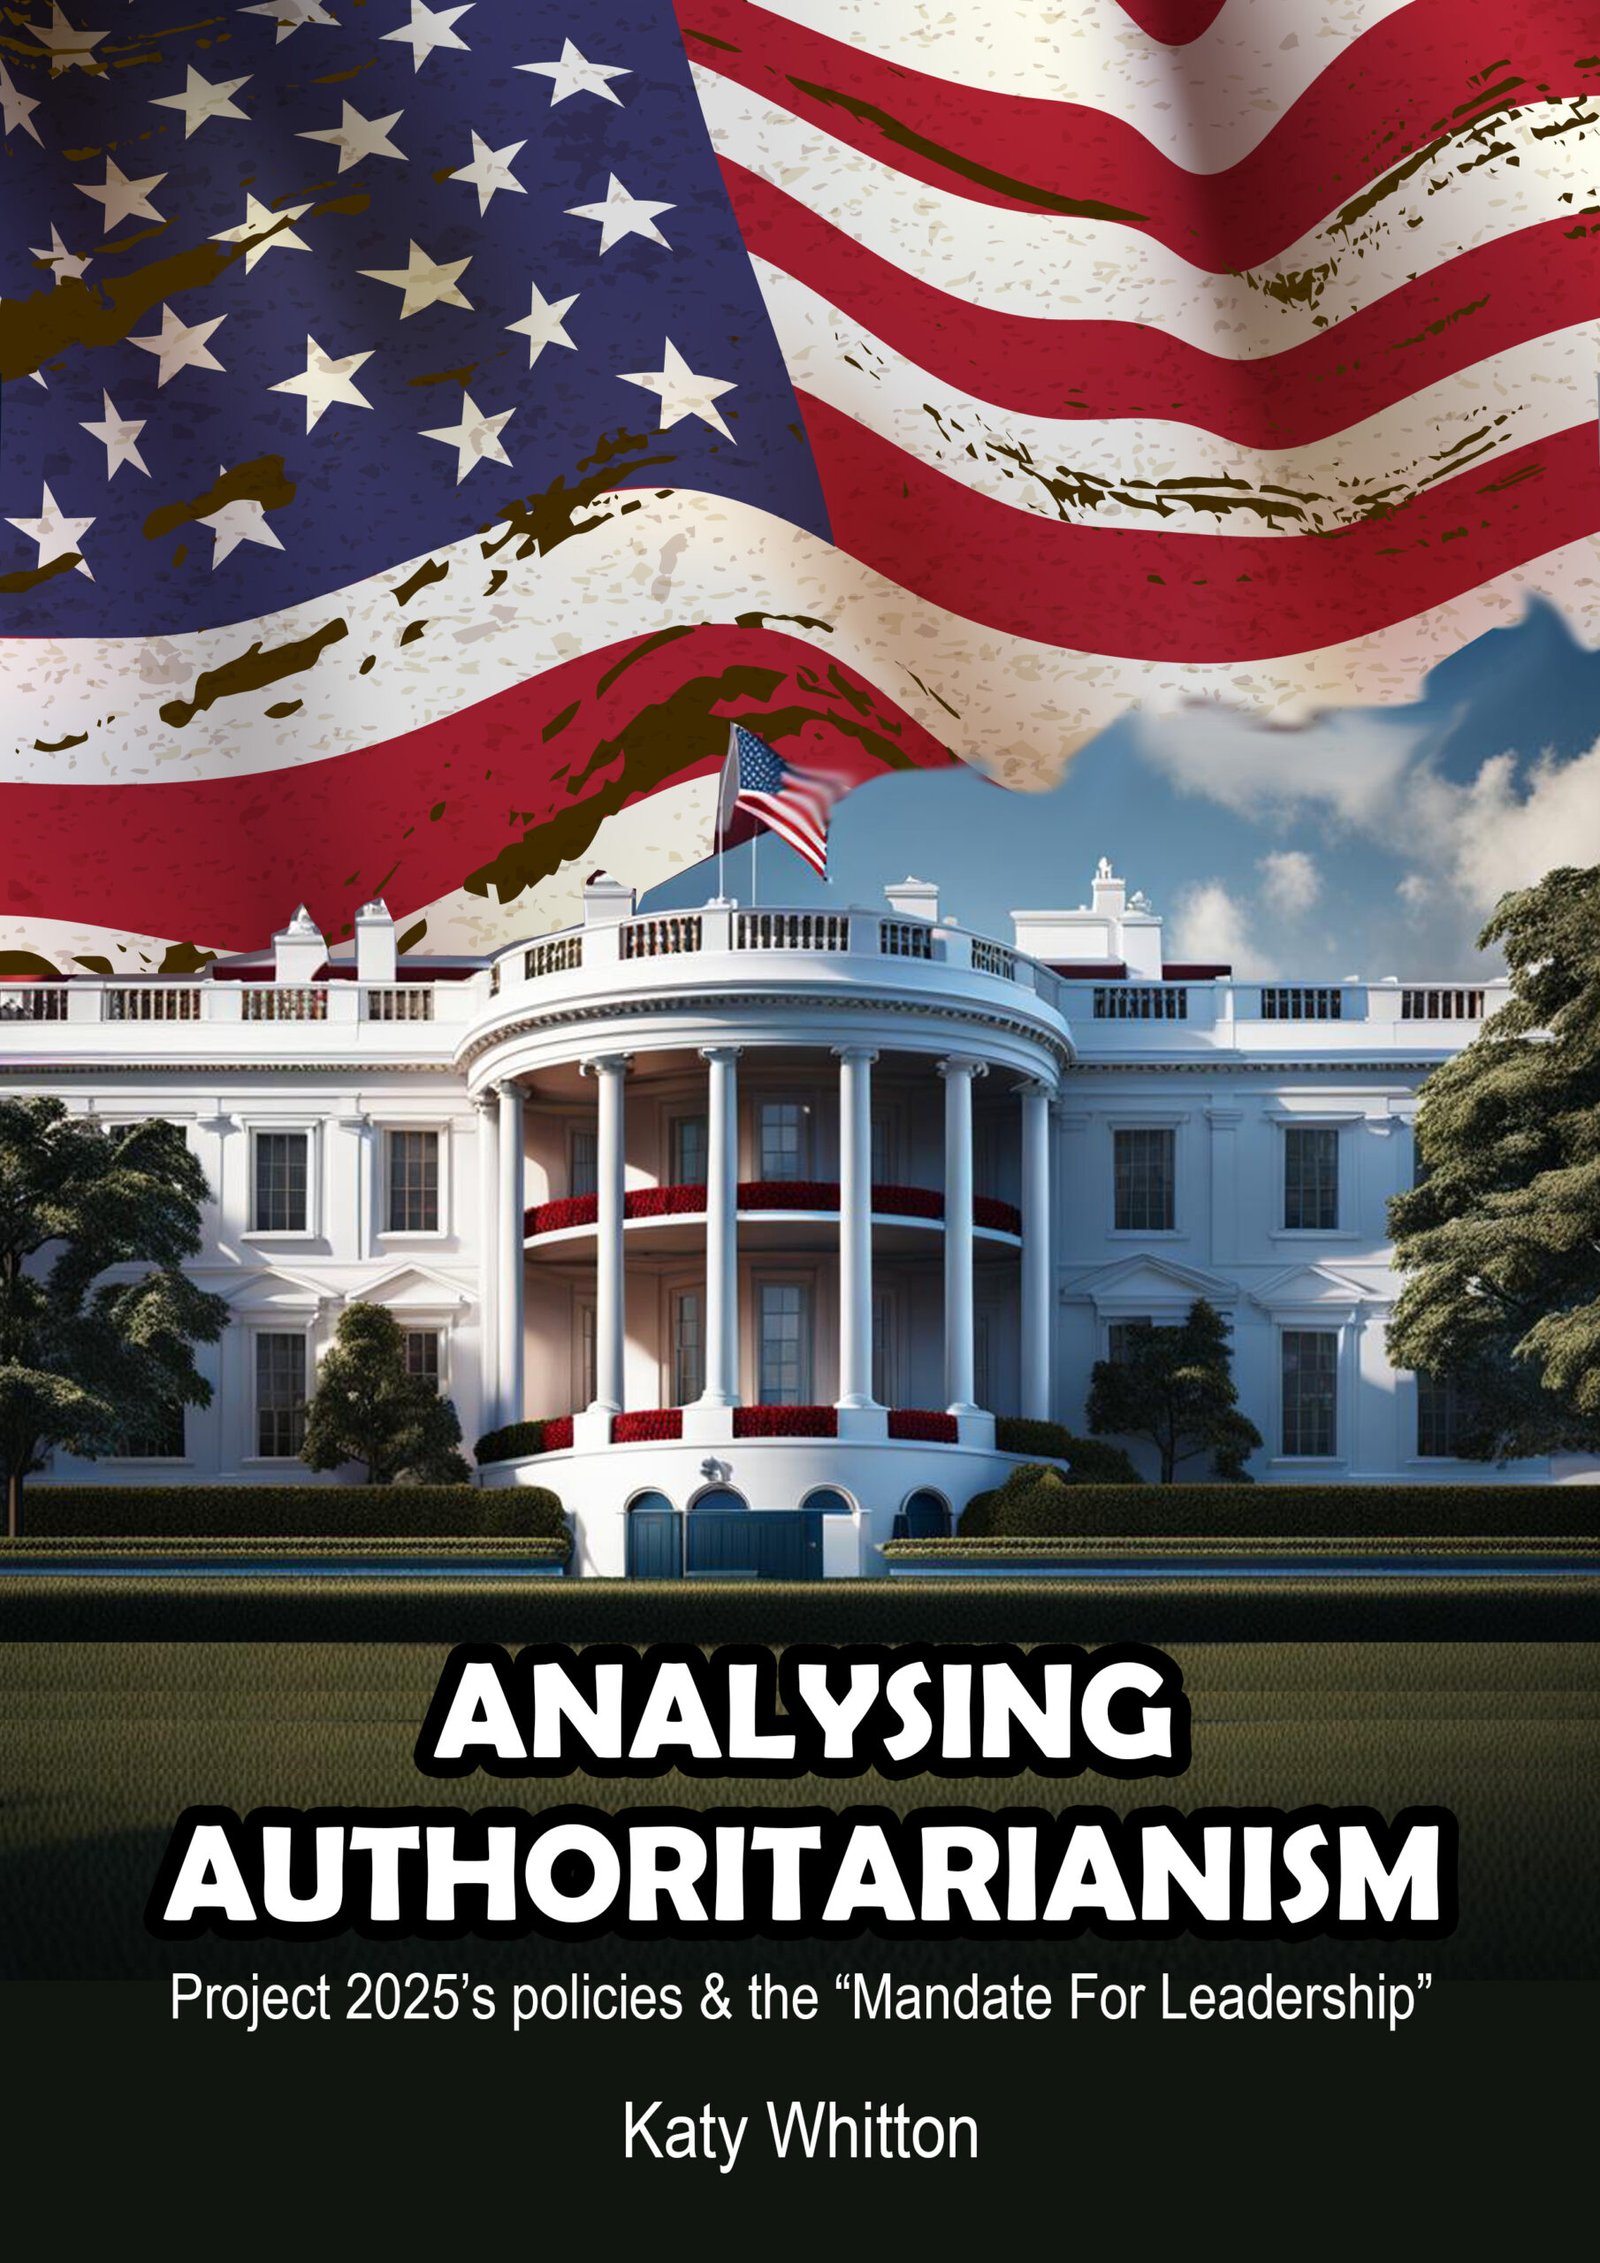 Analysing Authoritarianism: Project 2025’s Policies & The “mandate For Leadership”